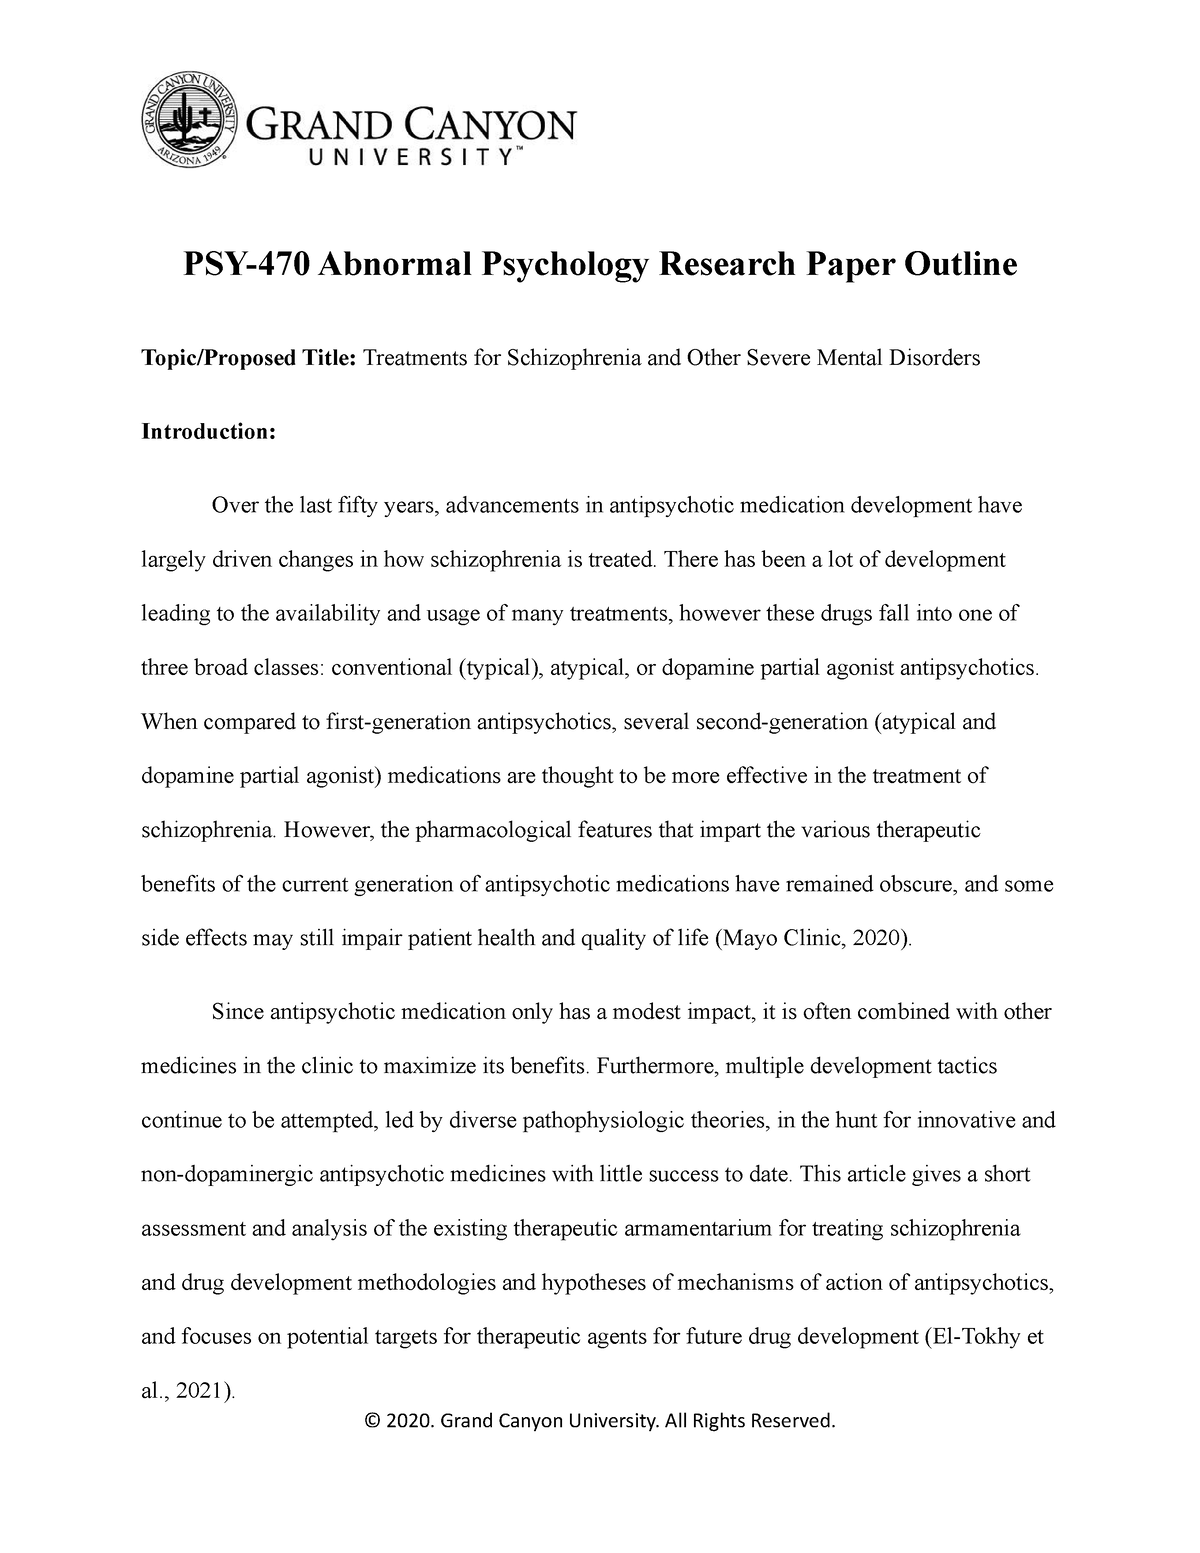 abnormal psychology research paper outline